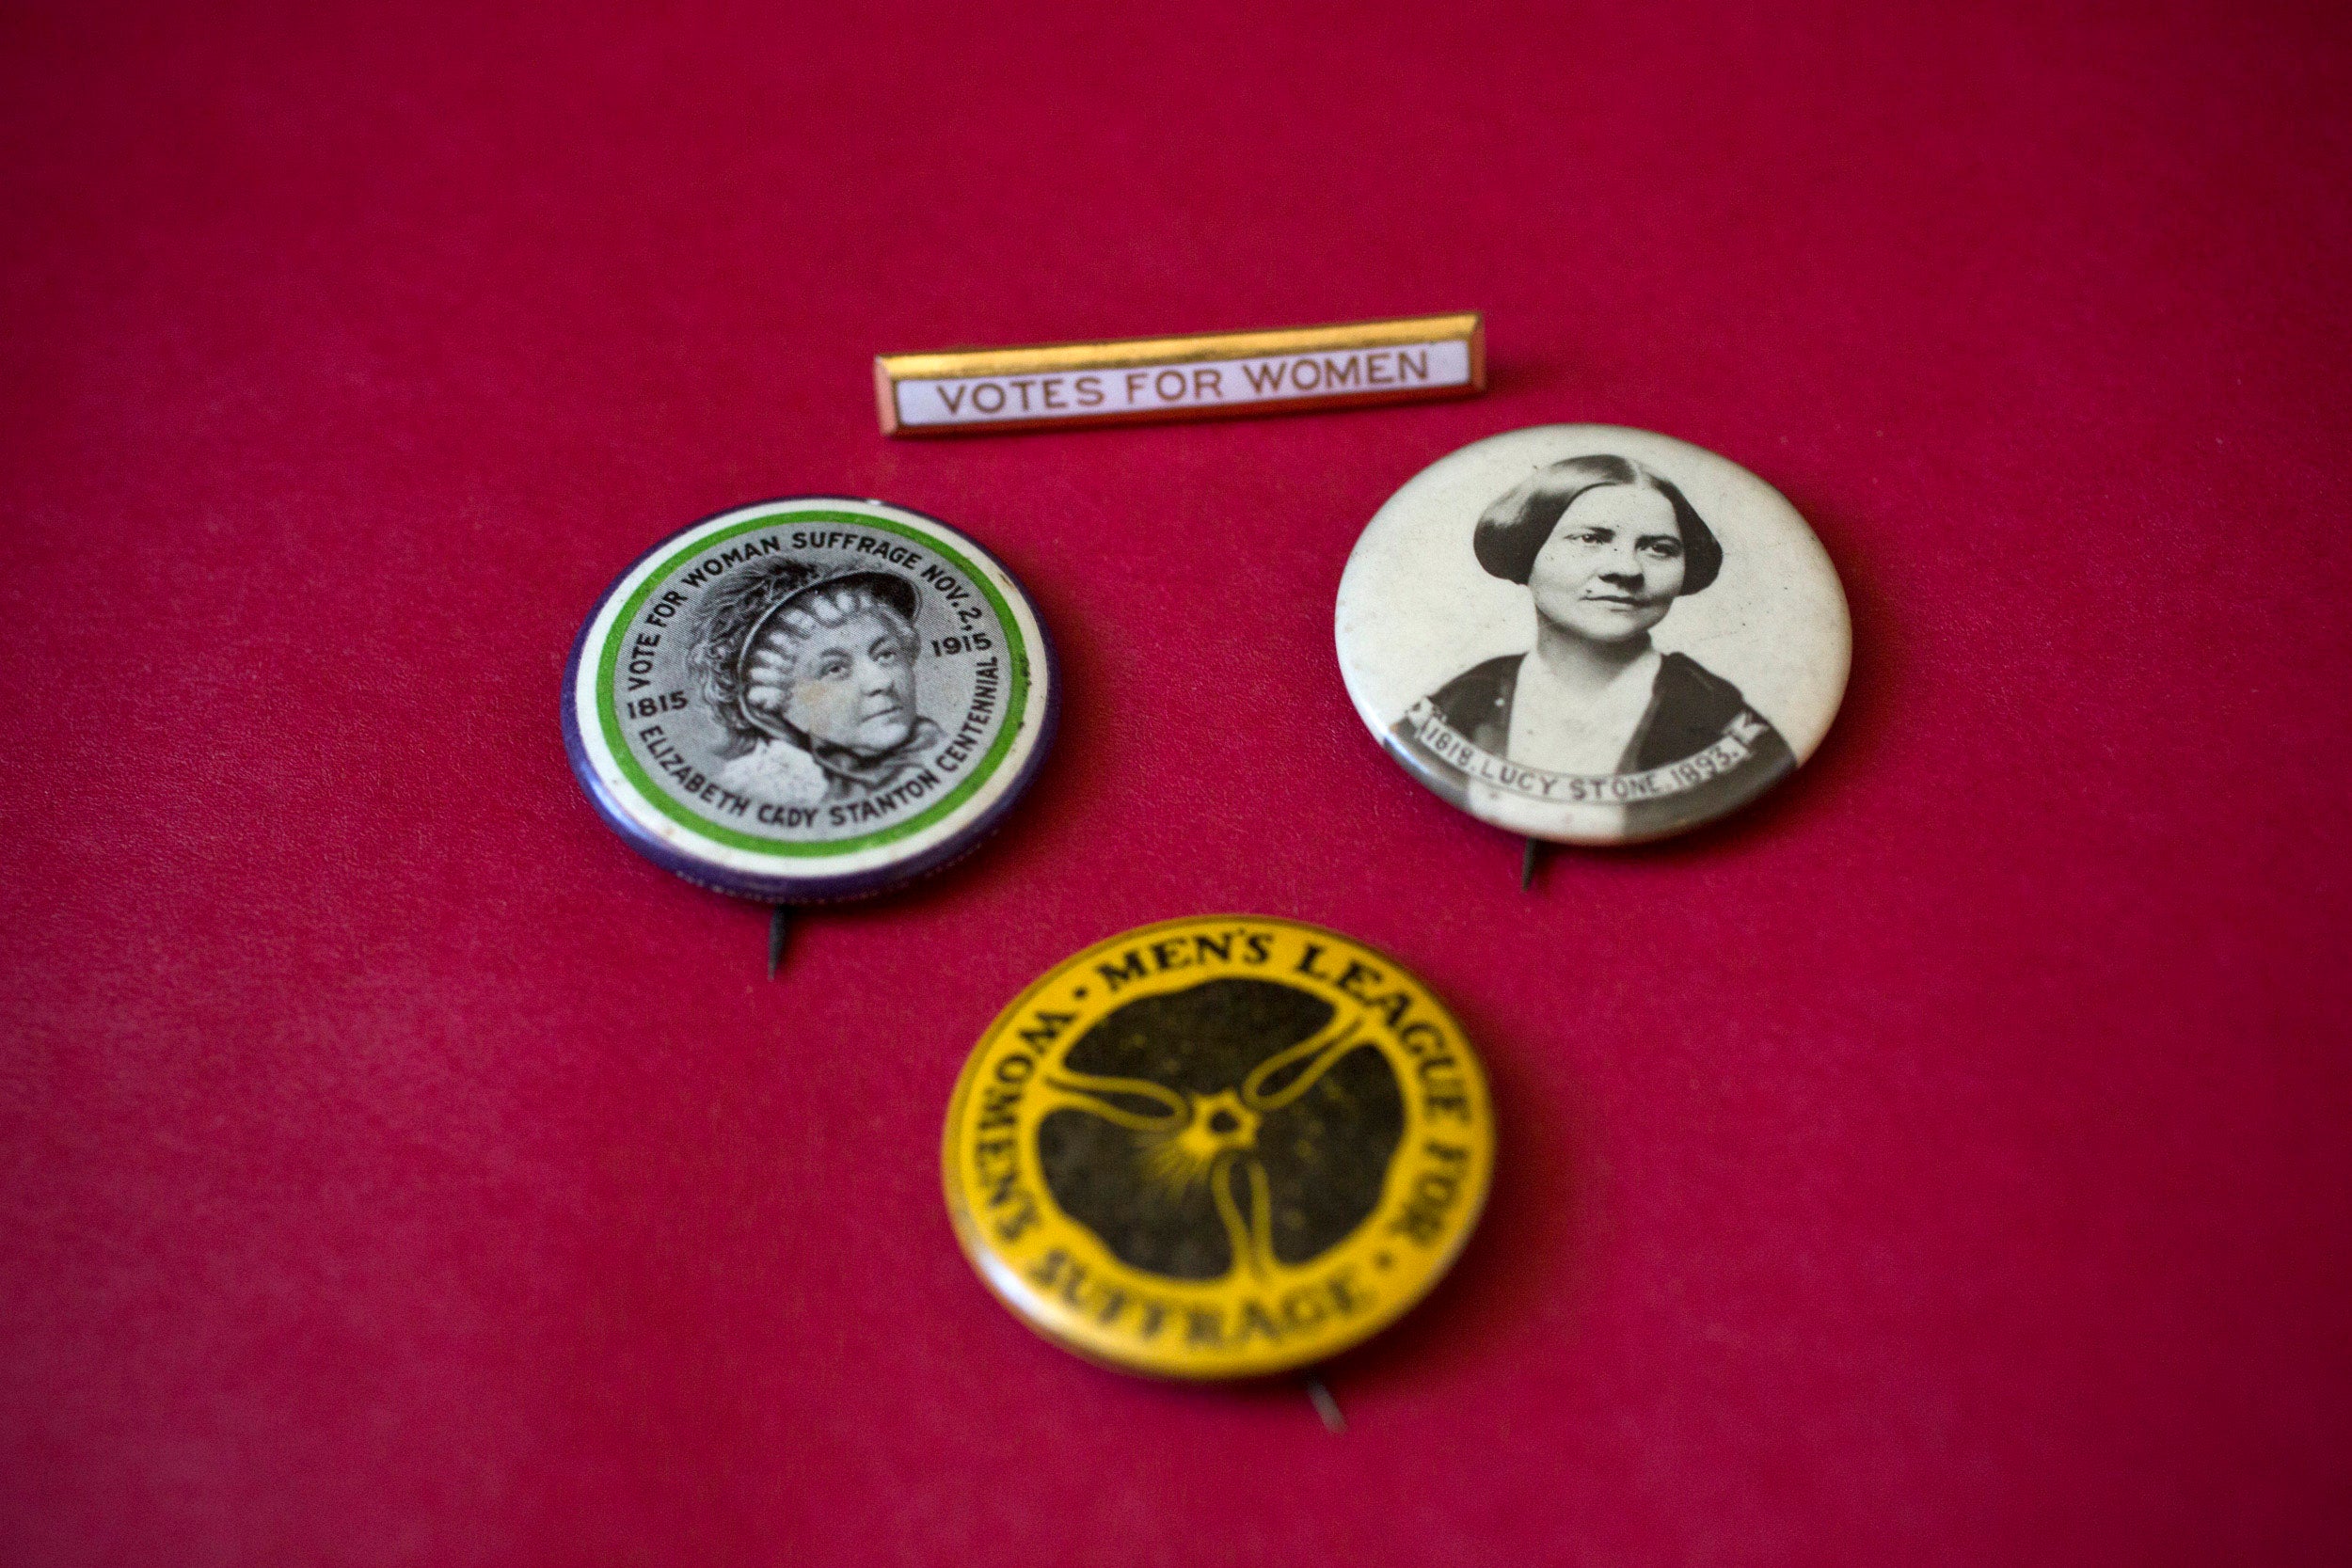 Women’s suffrage buttons show the likenesses of early suffragists Elizabeth Cady Stanton and Lucy Stone.